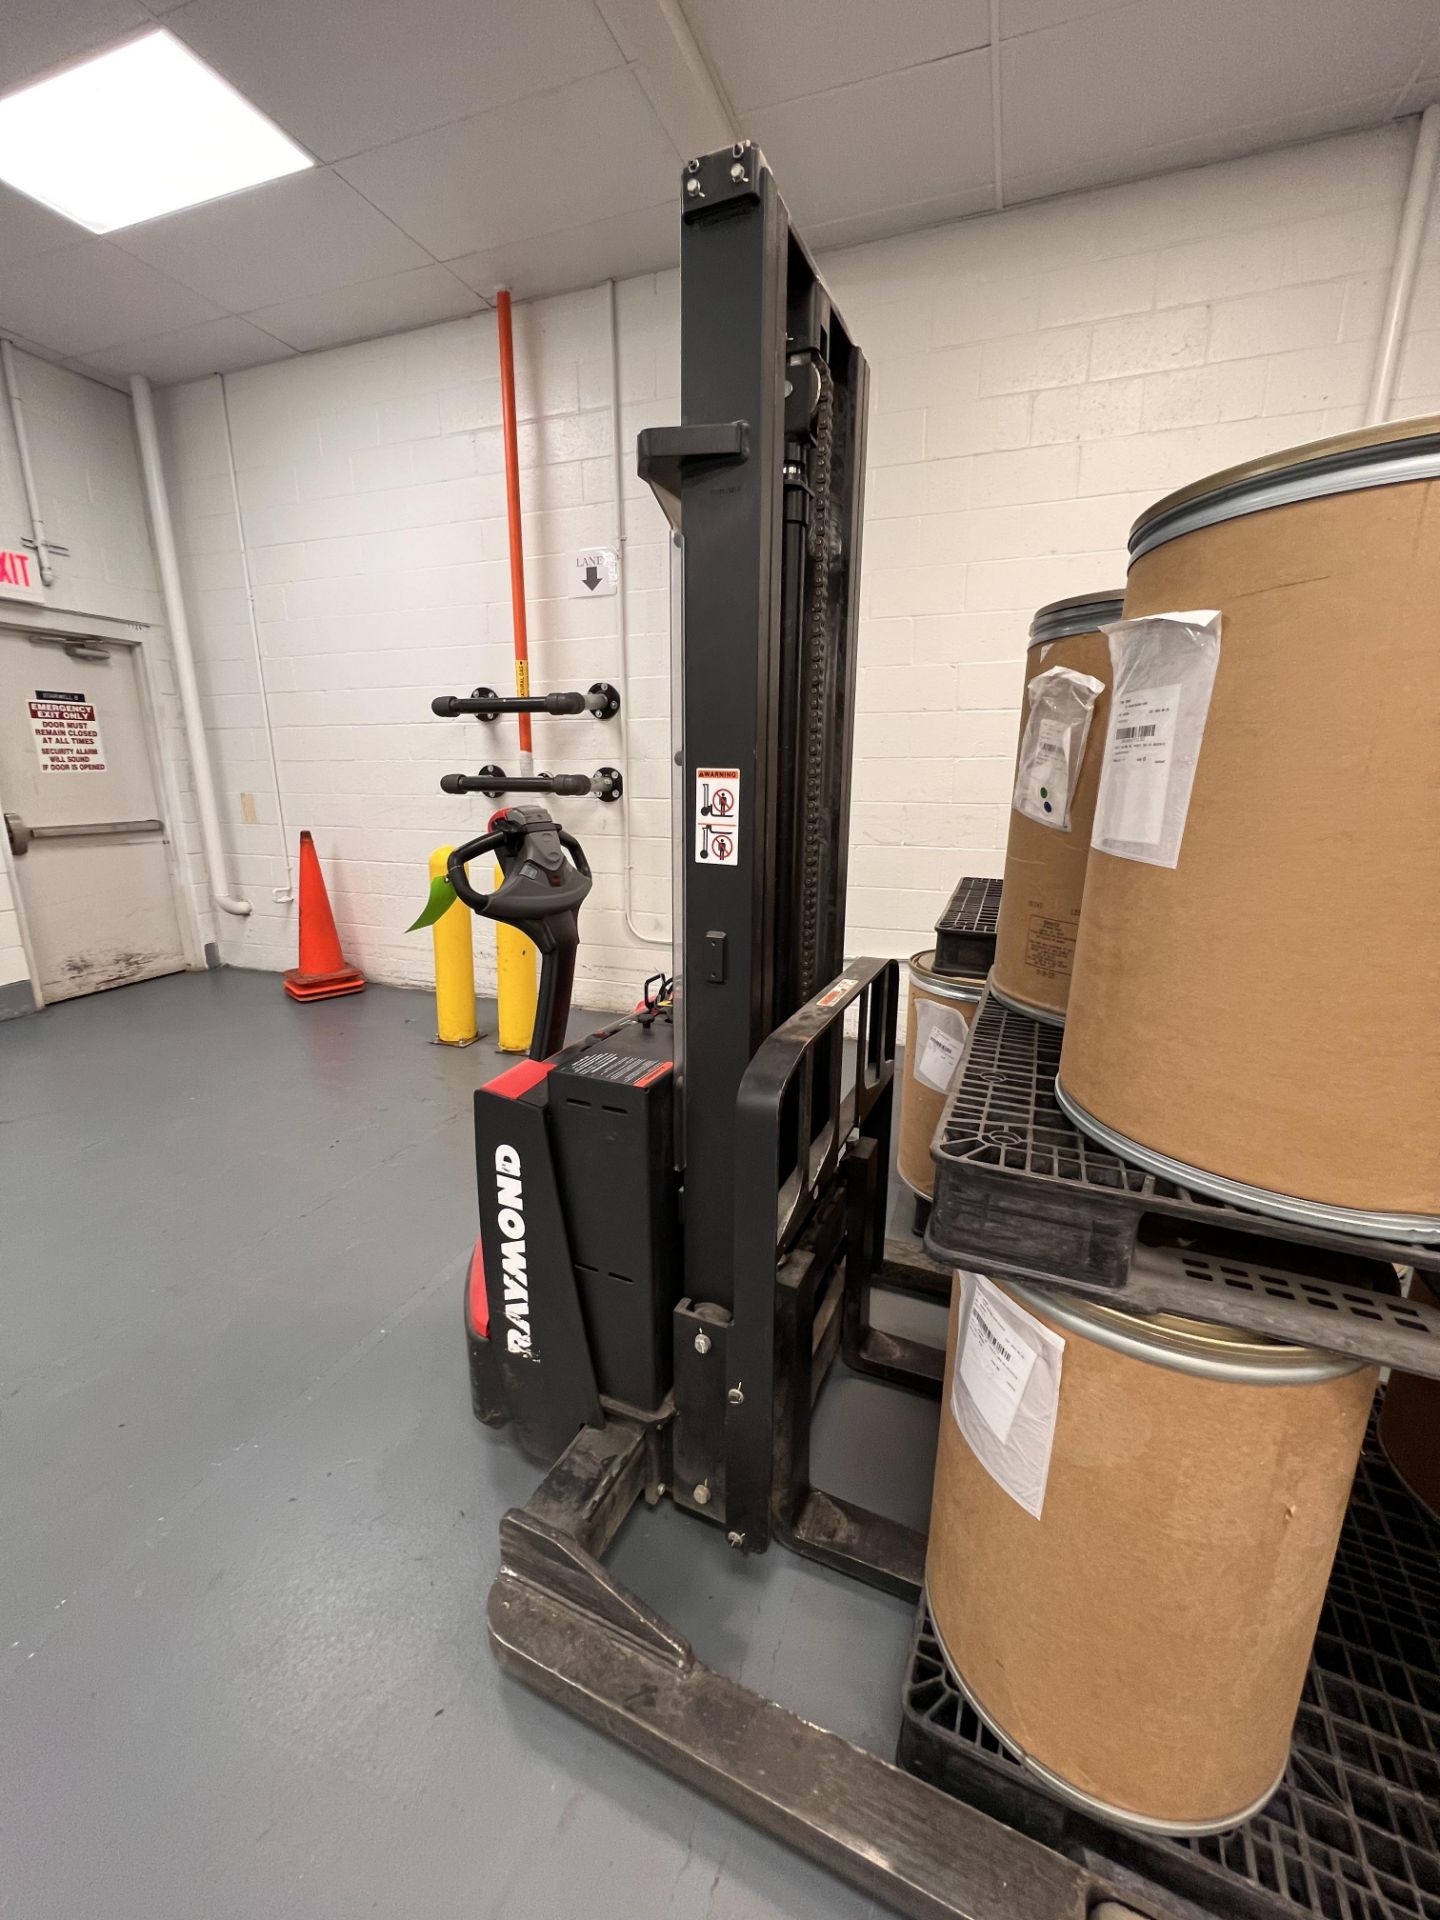 RAYMOND ELECTRIC WALK-BEHIND PALLET JACK, MODEL 6210, S/N 621-18-13633(SOLD SUBJECT TO CONFIRMATIO - Image 4 of 10